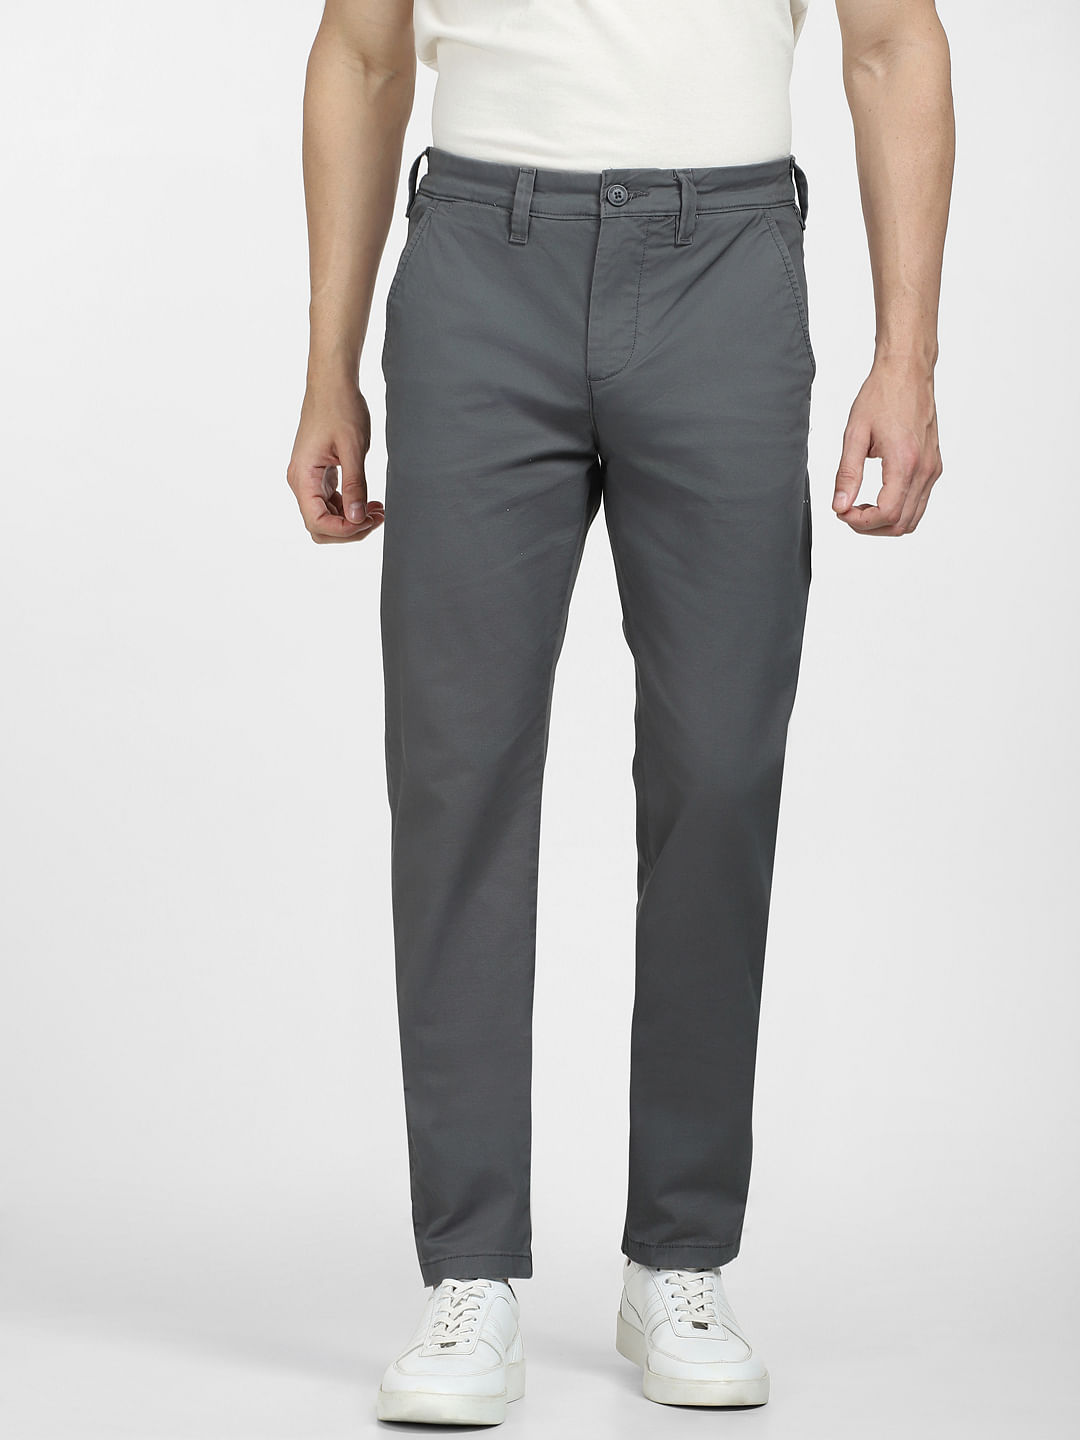 Amazon.com: Under Armour Men's Woven Vital Workout Pants, (013) Mod  Gray/Castlerock/White, X-Small : Clothing, Shoes & Jewelry